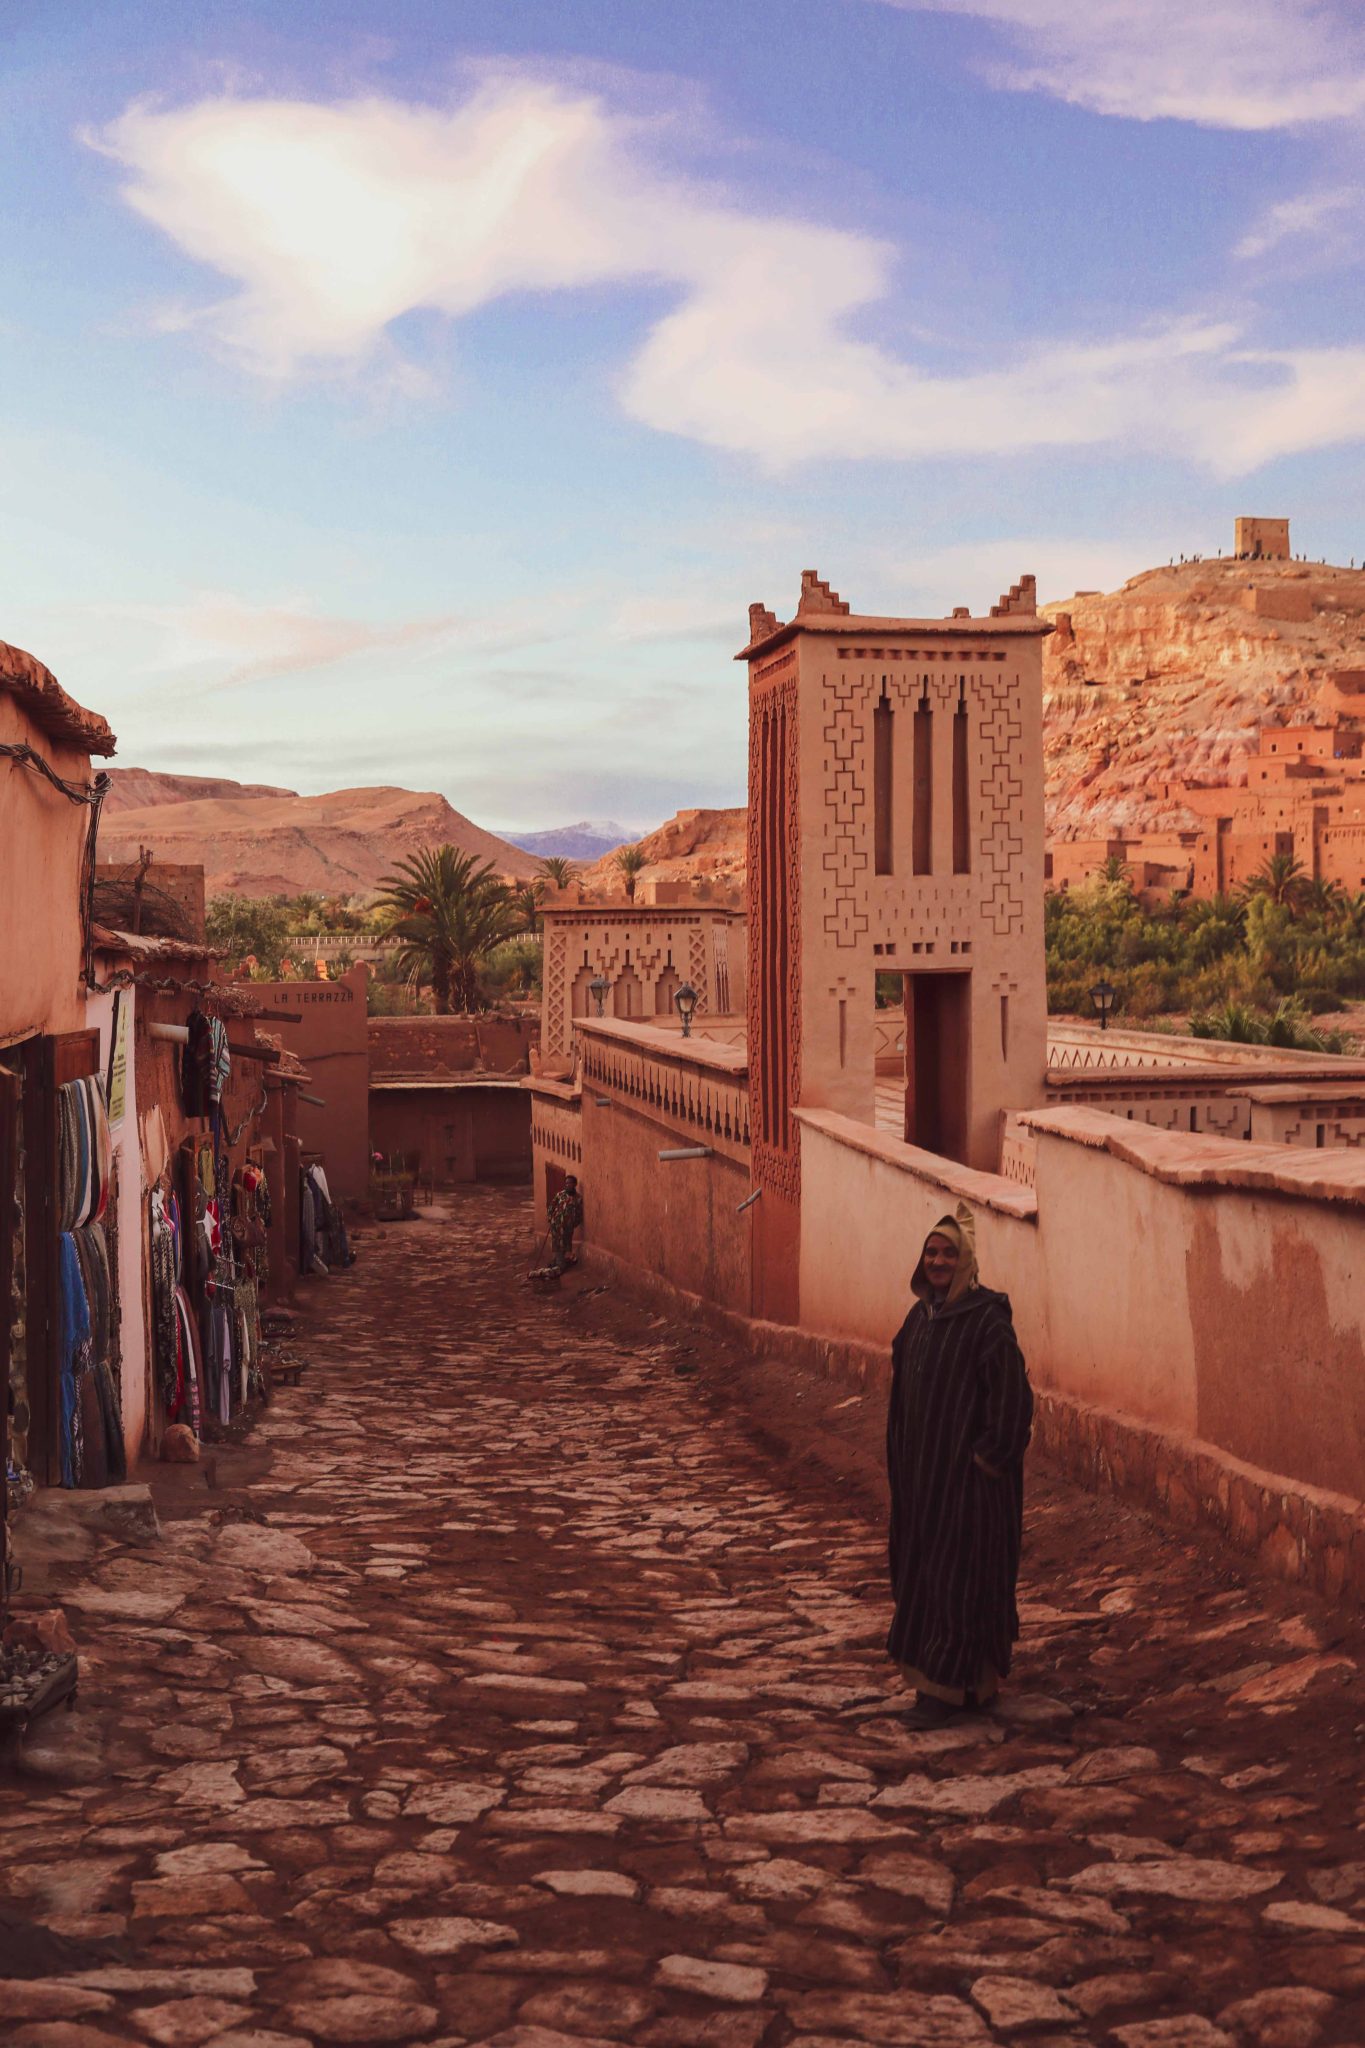 Our women discover a red colour village in Morocco while on tour